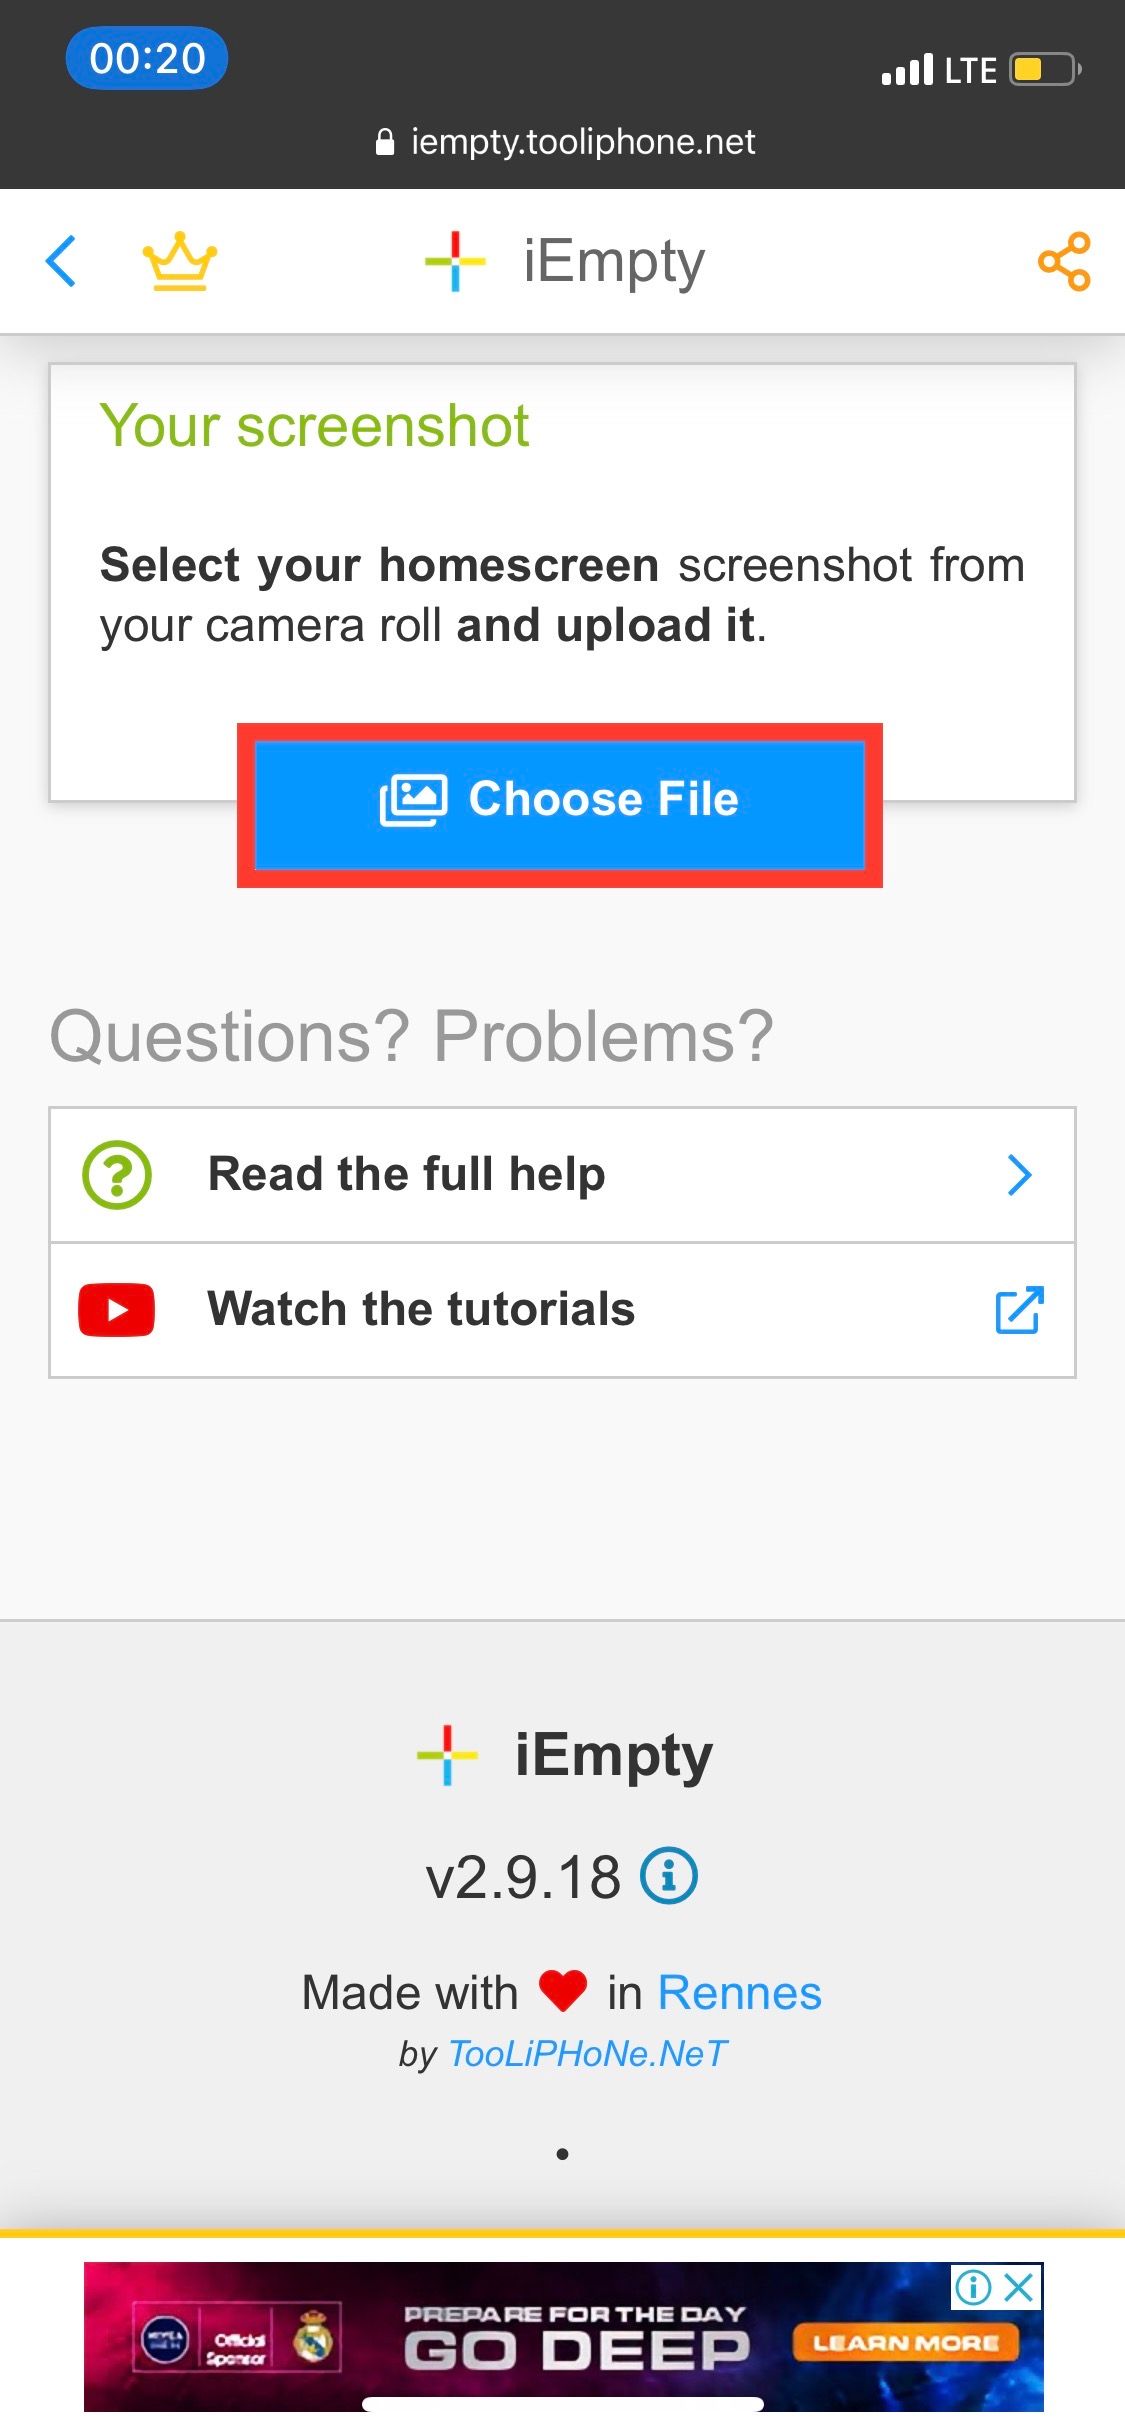 iEmpty dashboard with 'Choose File' highlighted